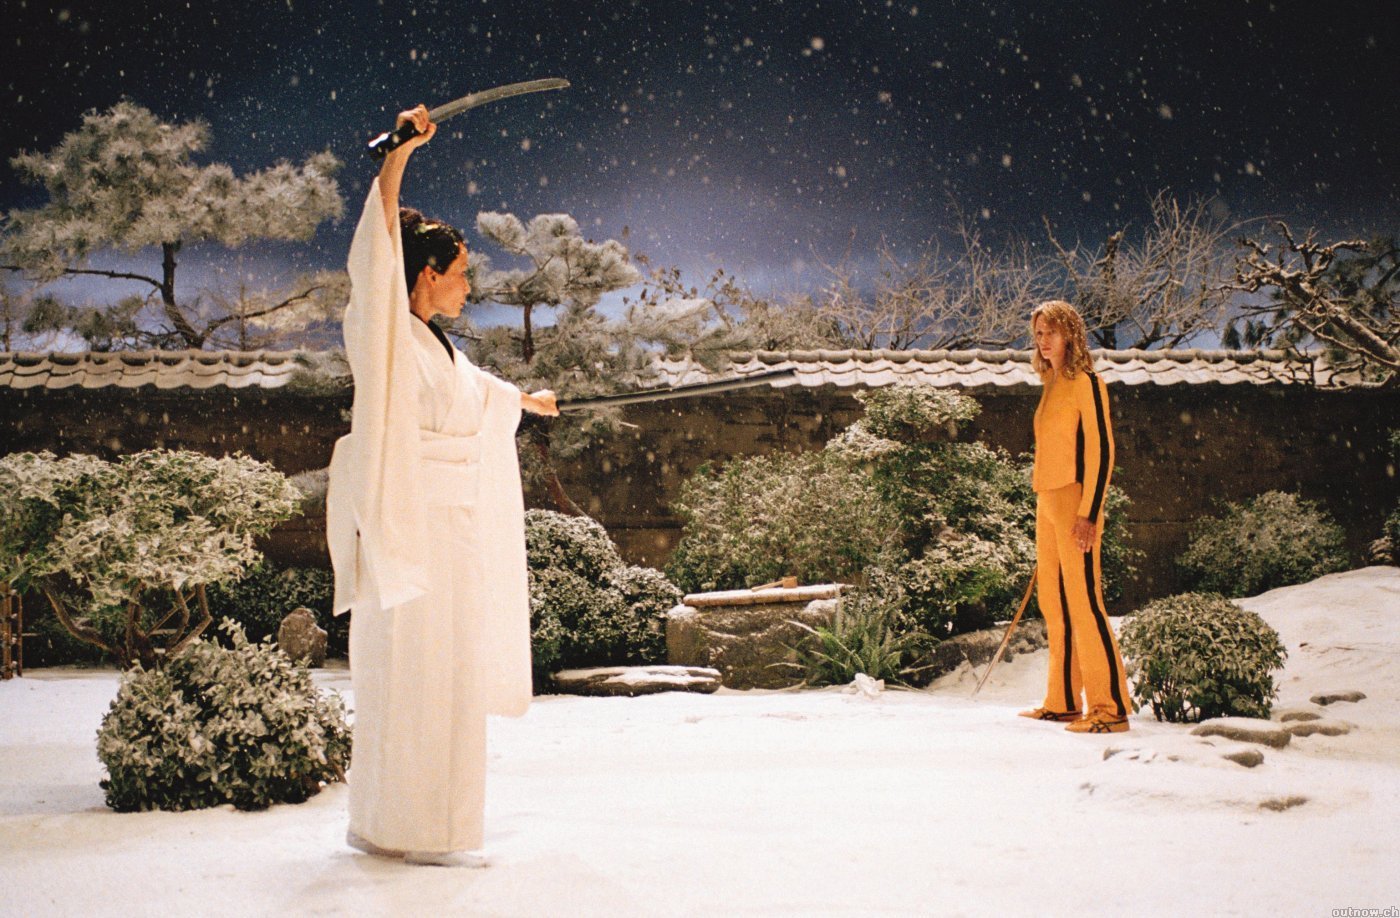 10 out of 10 – ‘Kill Bill’